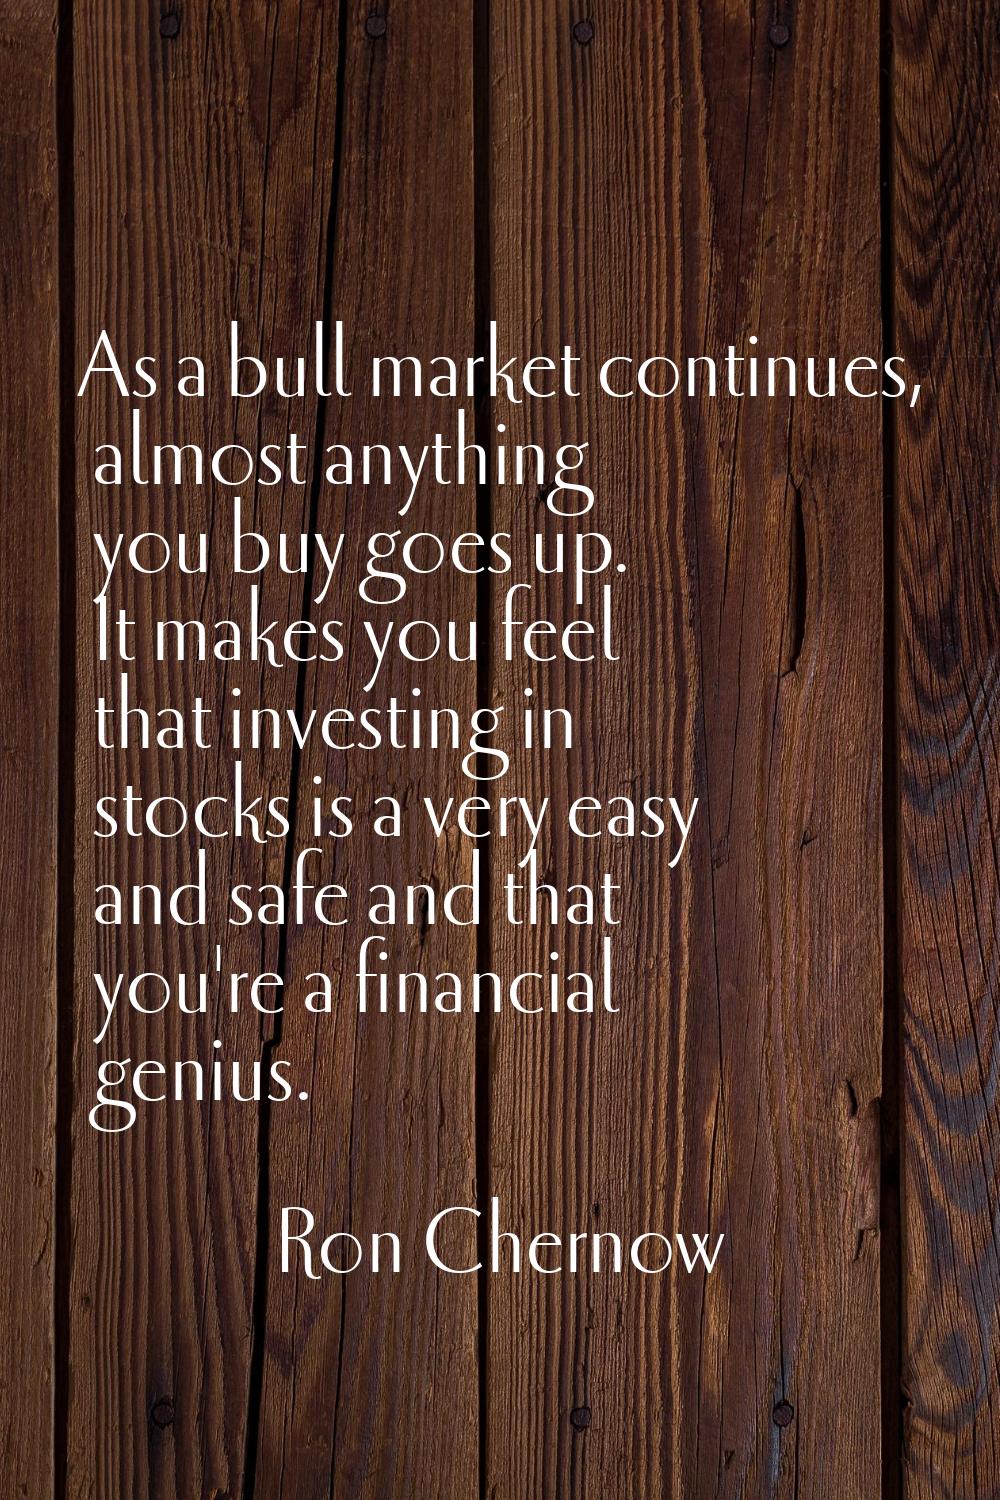 As a bull market continues, almost anything you buy goes up. It makes you feel that investing in st